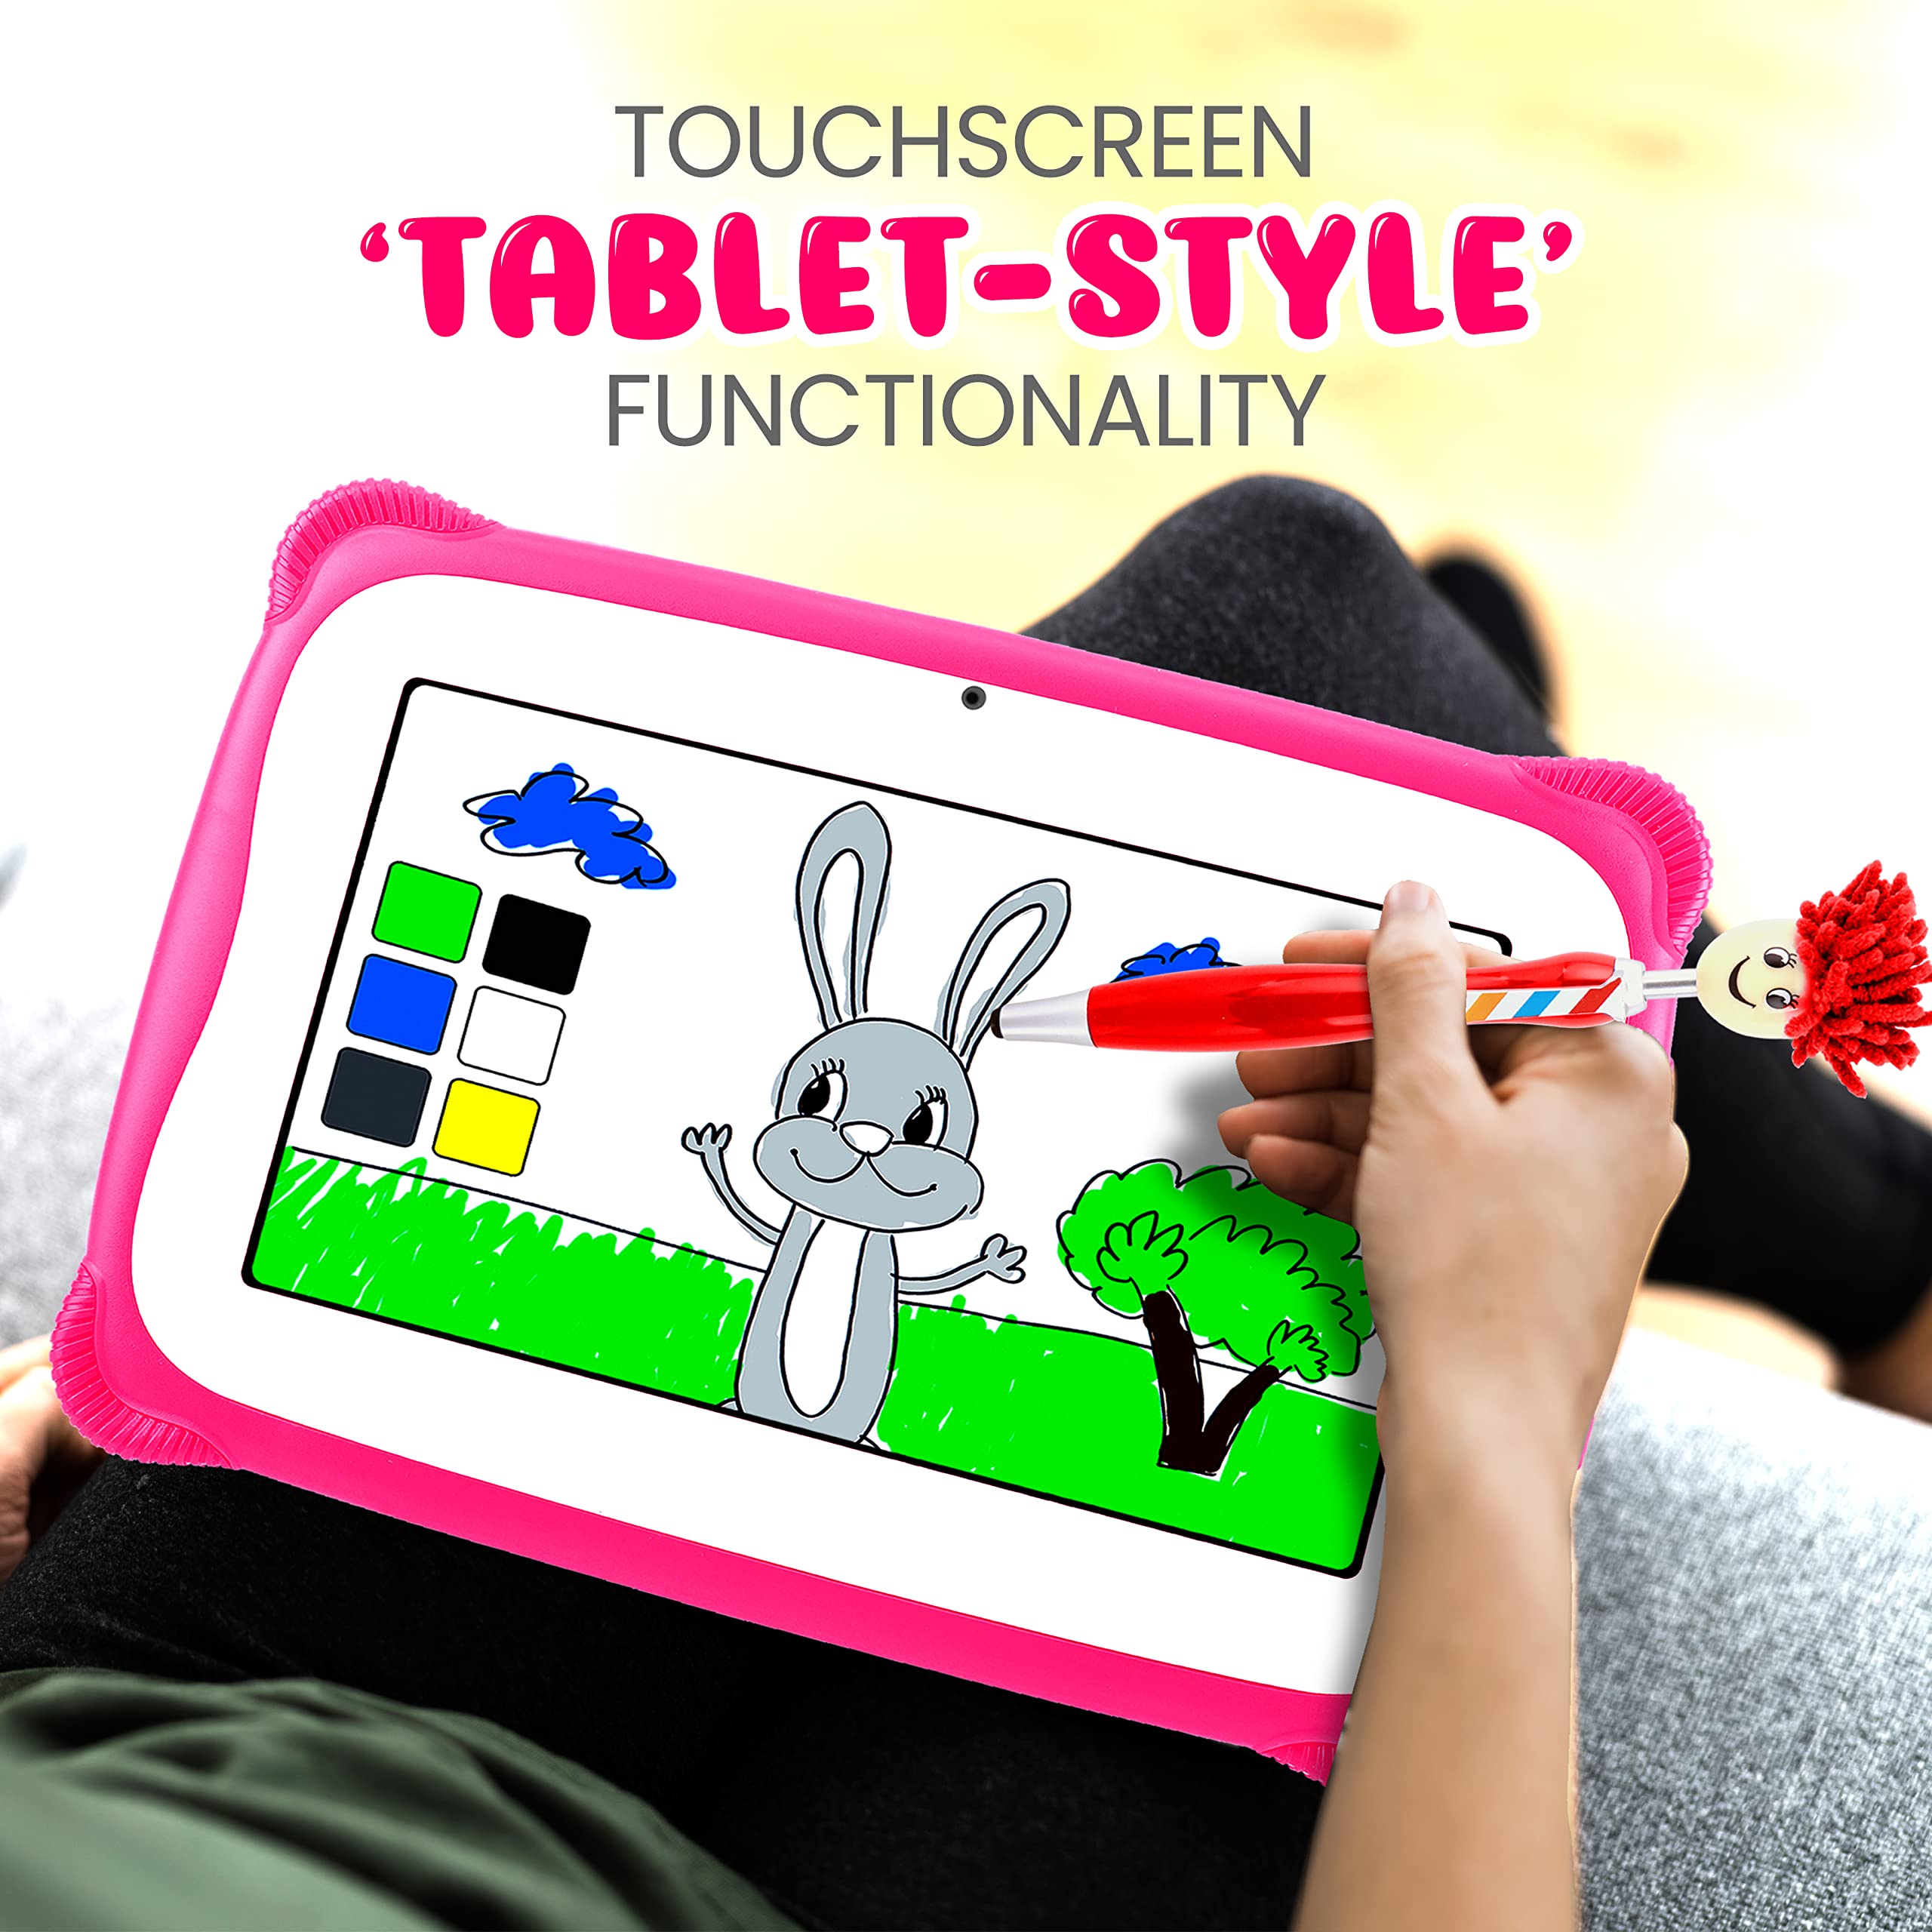 ﻿Kids Tablet W/Stylus Pen 7Inch WiFi Android 10 Children Tablet 1GB RAM 8GB Storage Quad-Core 2800 mAH Parental Control Educational Learning Games Dual Camera YouTube Toddler/Kid Proof Case (Hot Pink)